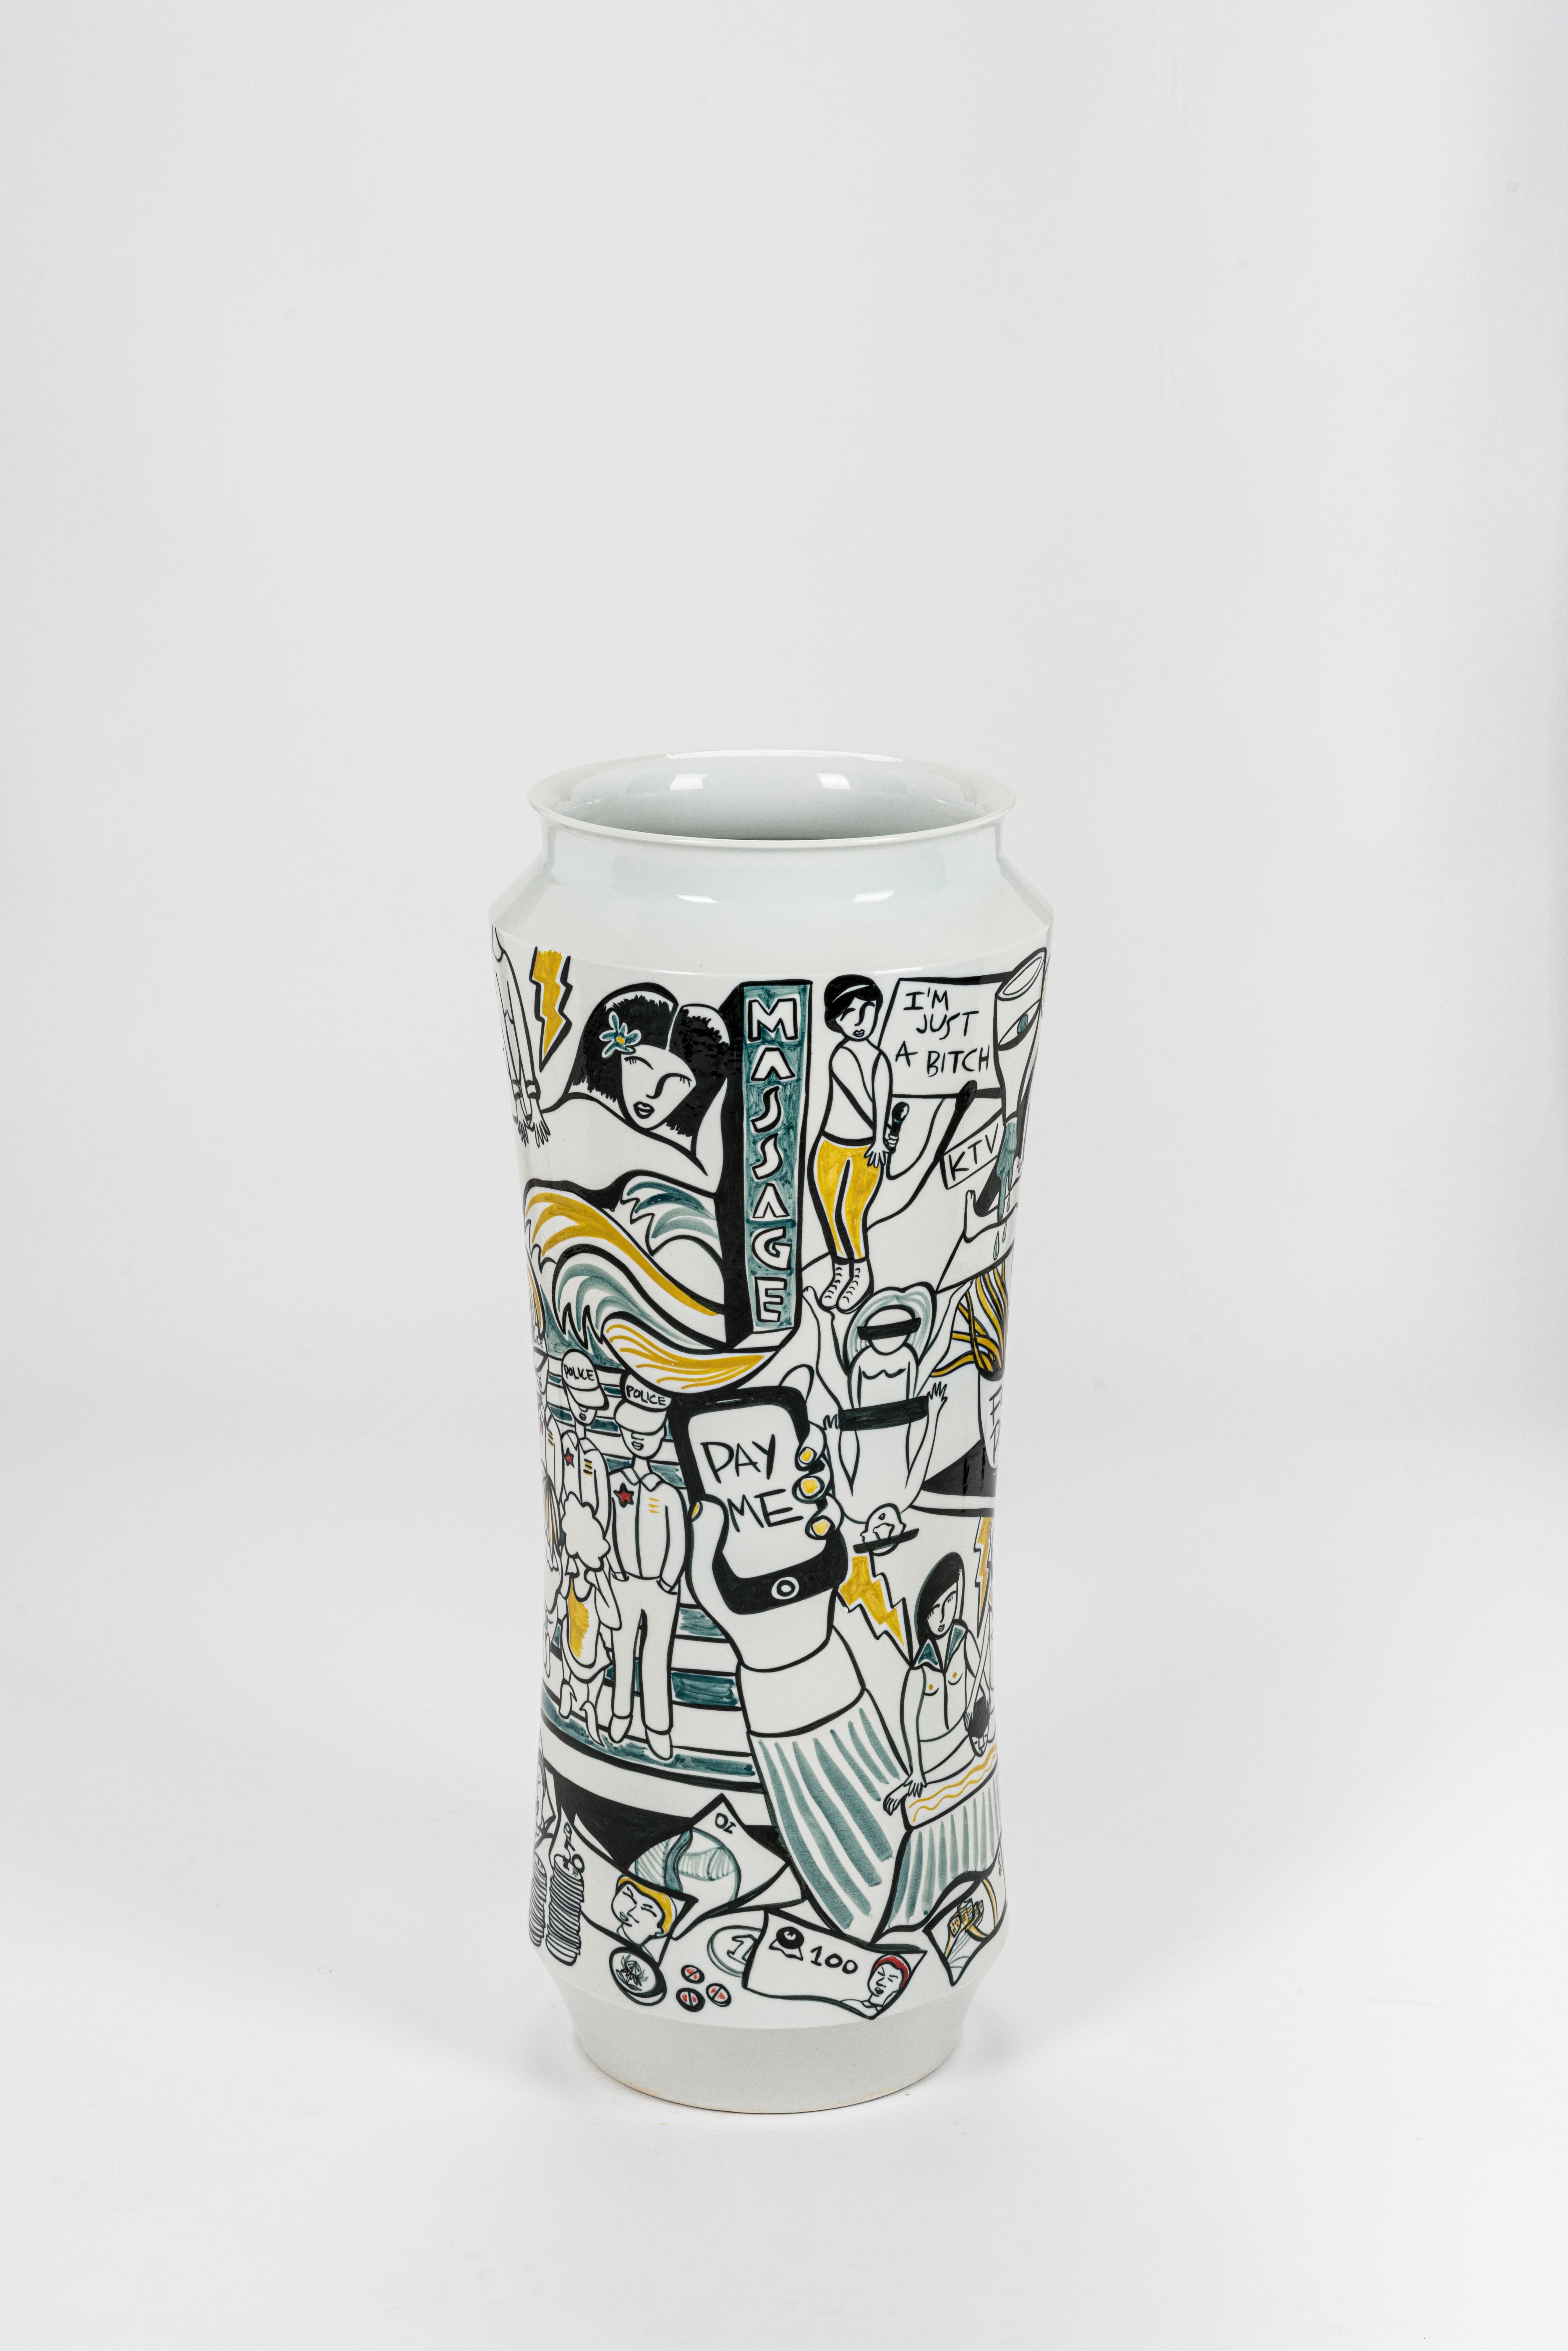 Luce Raggi, Massage (food porn), 2017 glazed porcelain 65 x 25 cm 

Hand-painted vase representing police men, seductive women and amused saints, all dedicated to
their passion for Chinese massage. Work with a strong double meaning. Part of a